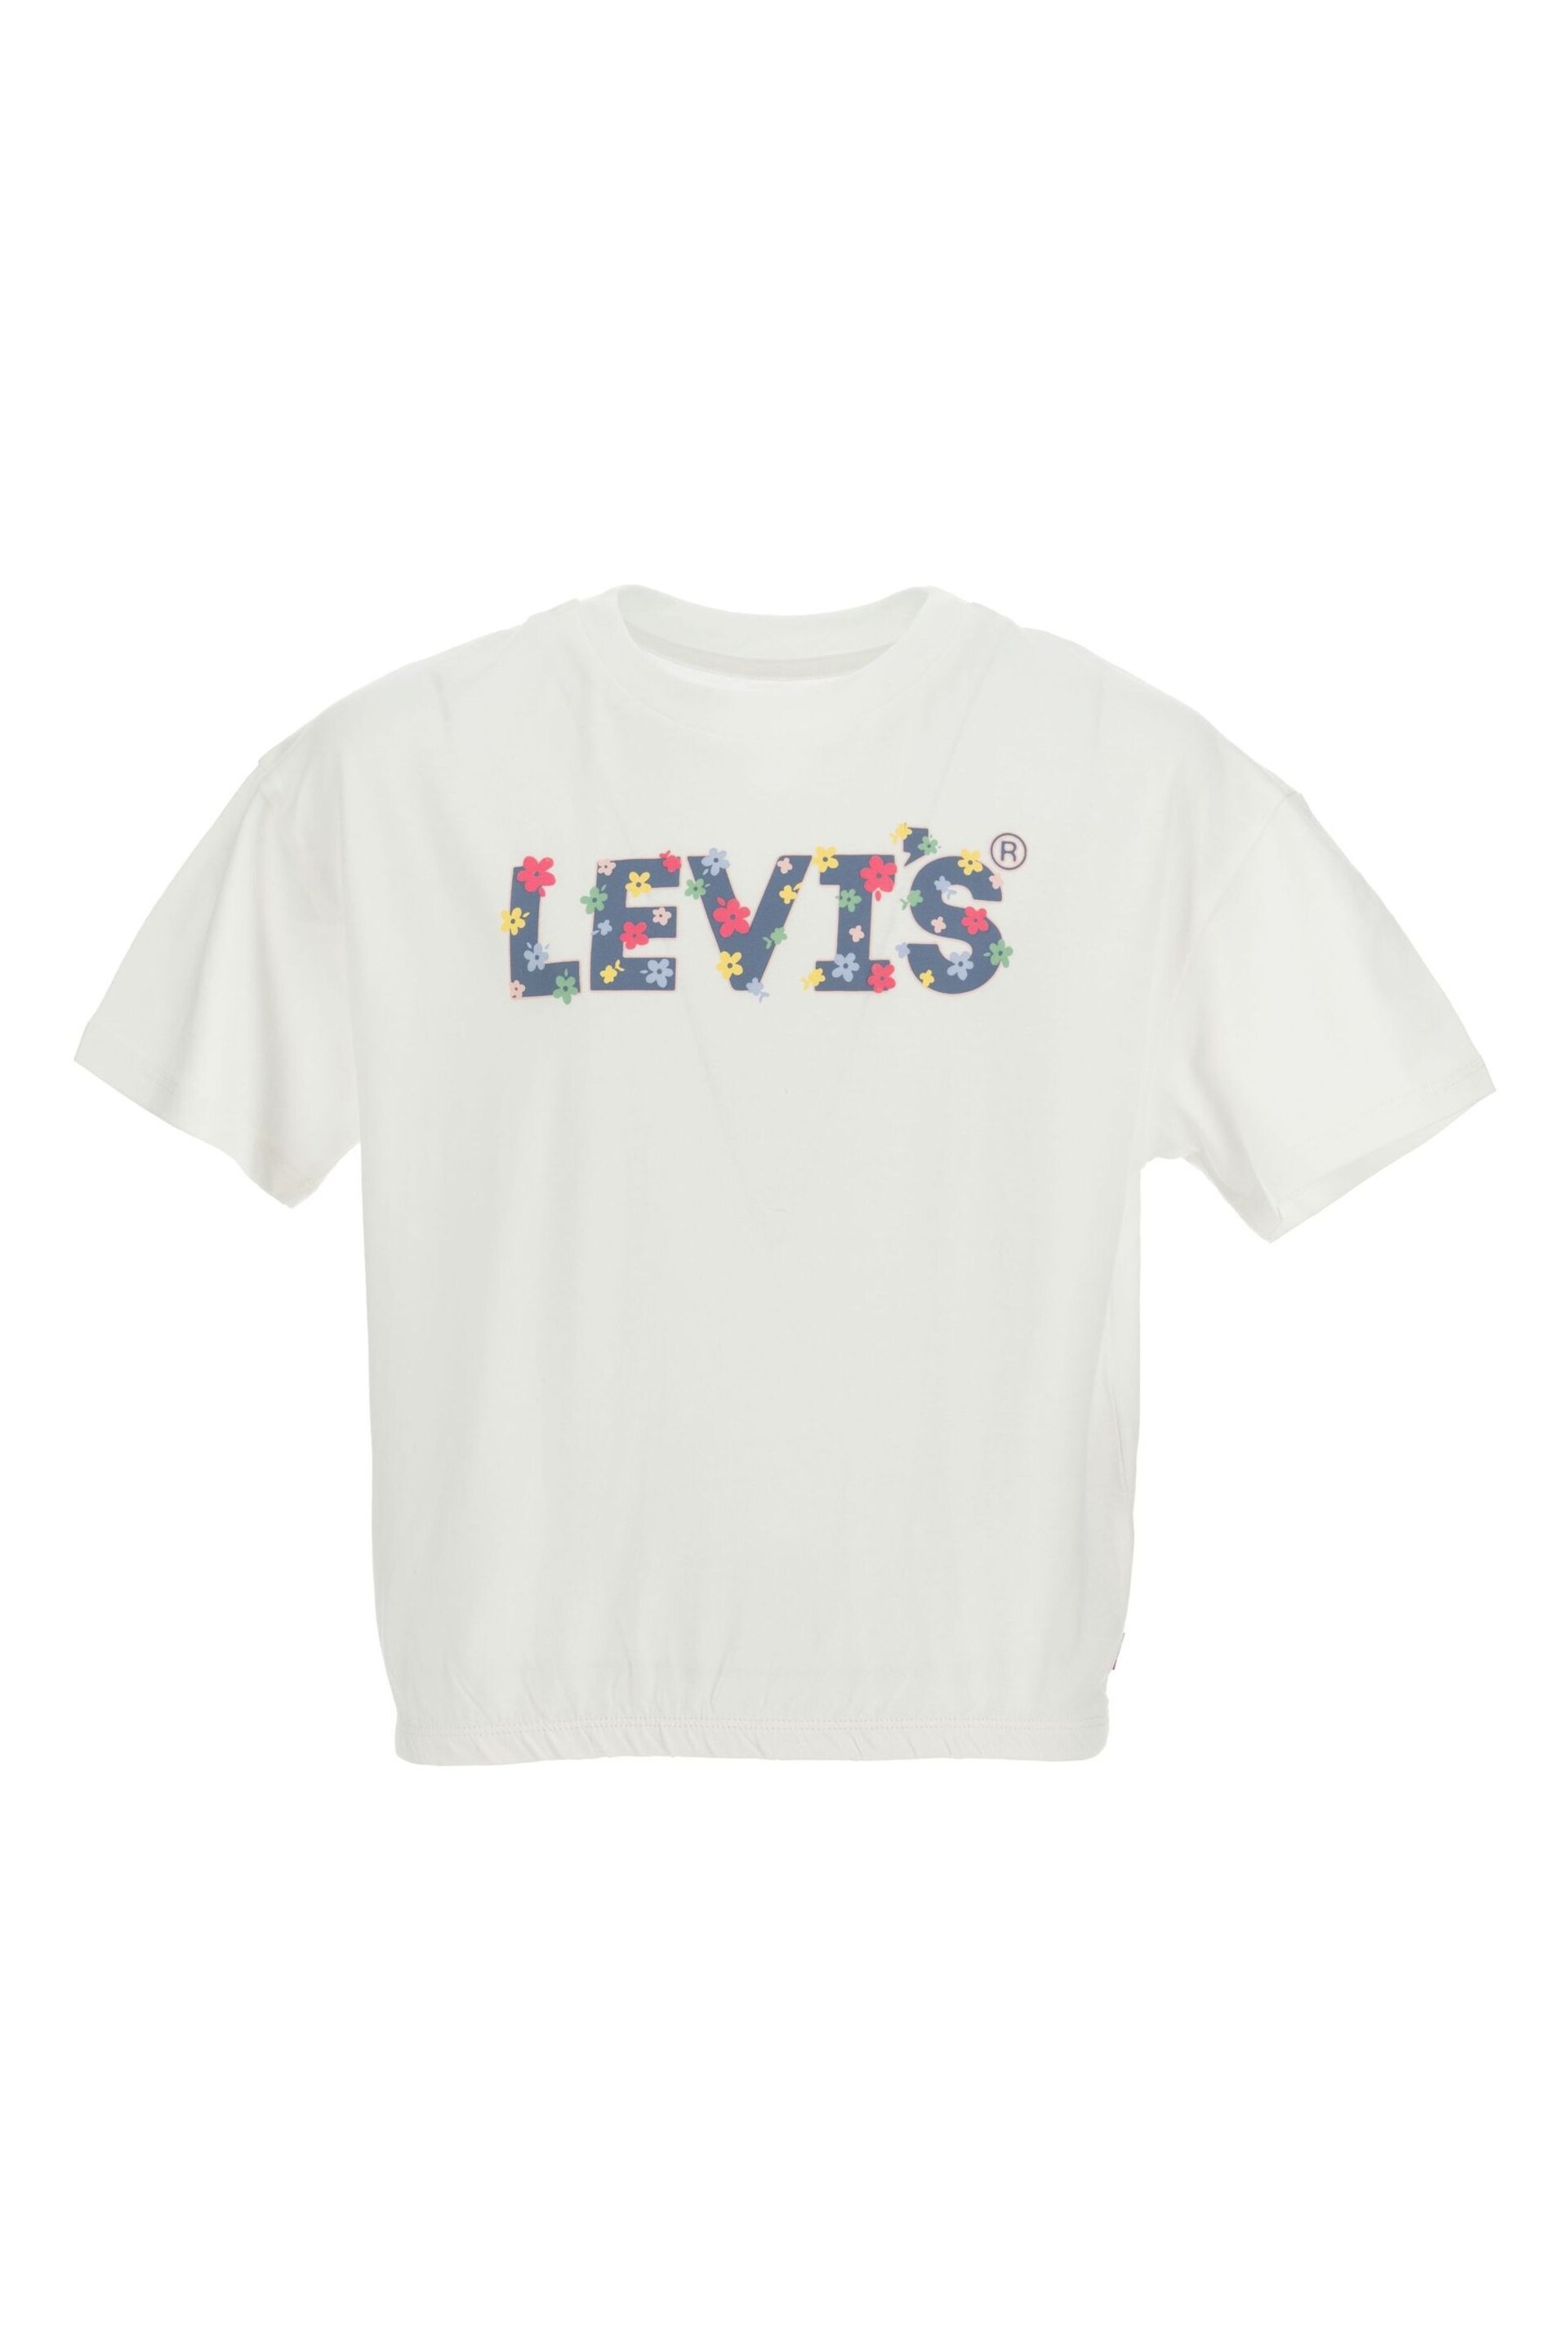 Levi's® White Floral Logo Cropped  T-Shirt - Image 1 of 3